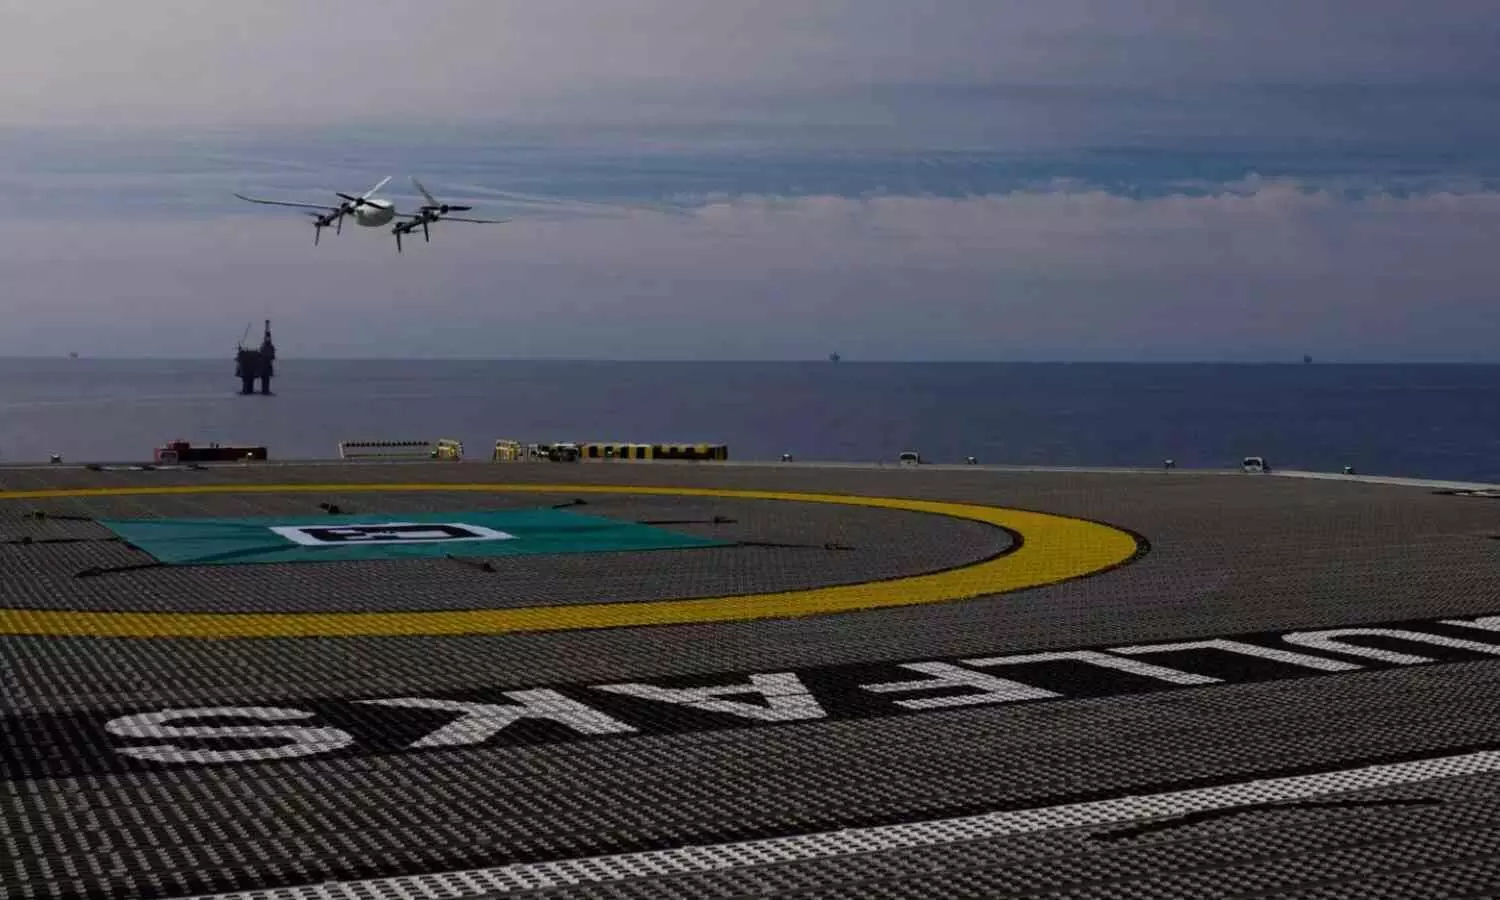 Skyports partners with Equinor for drone deliveries in North Sea